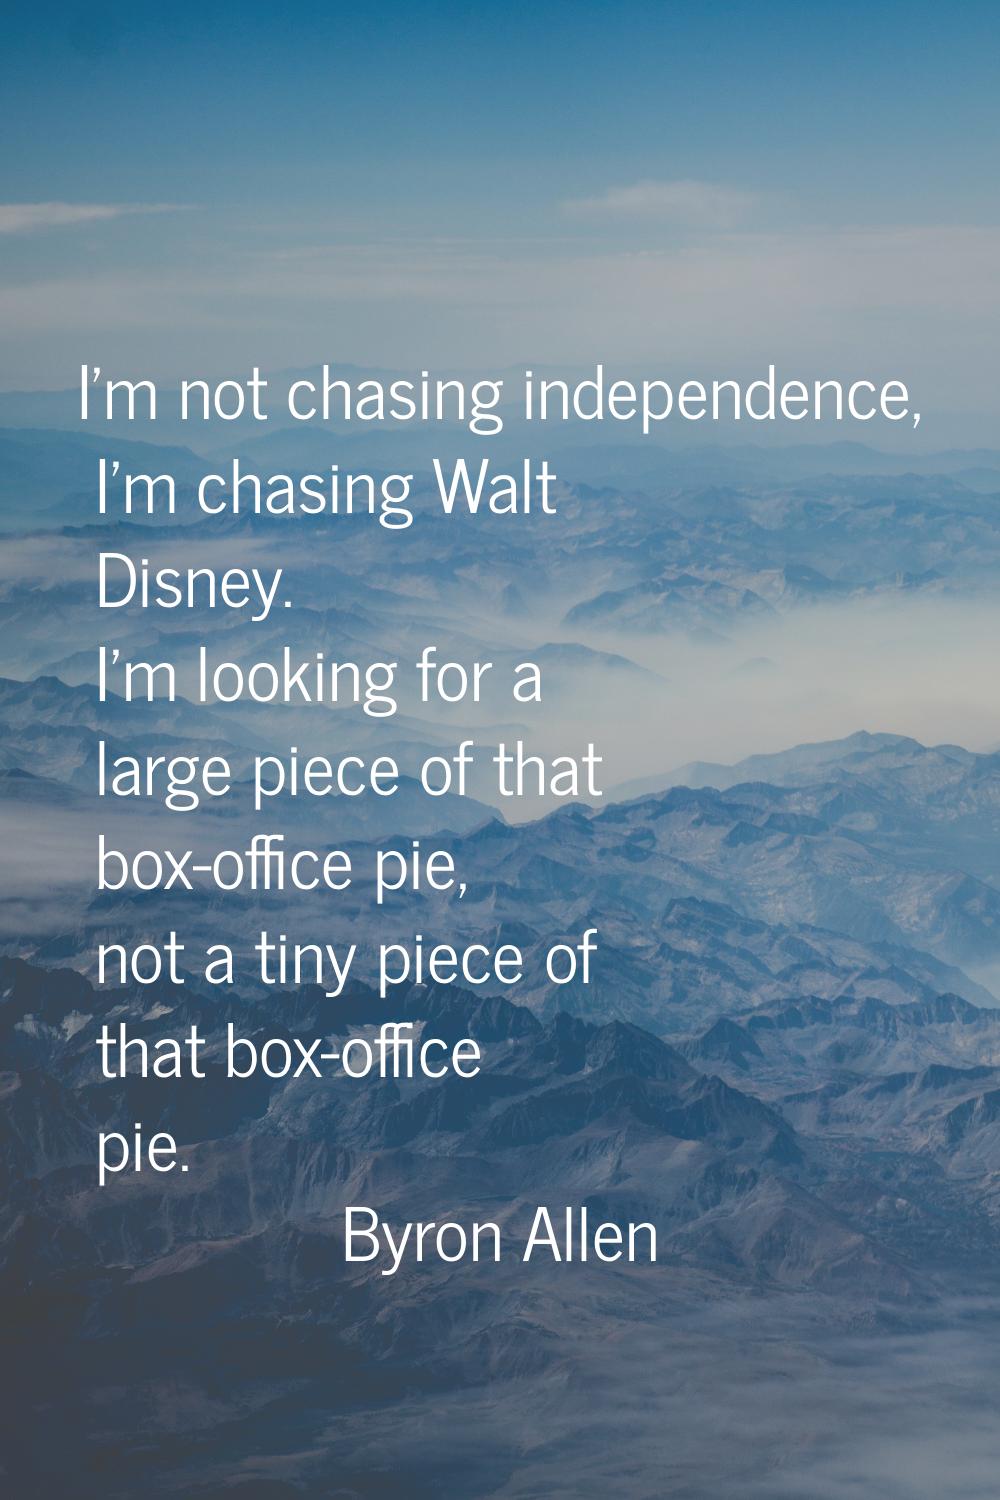 I'm not chasing independence, I'm chasing Walt Disney. I'm looking for a large piece of that box-of